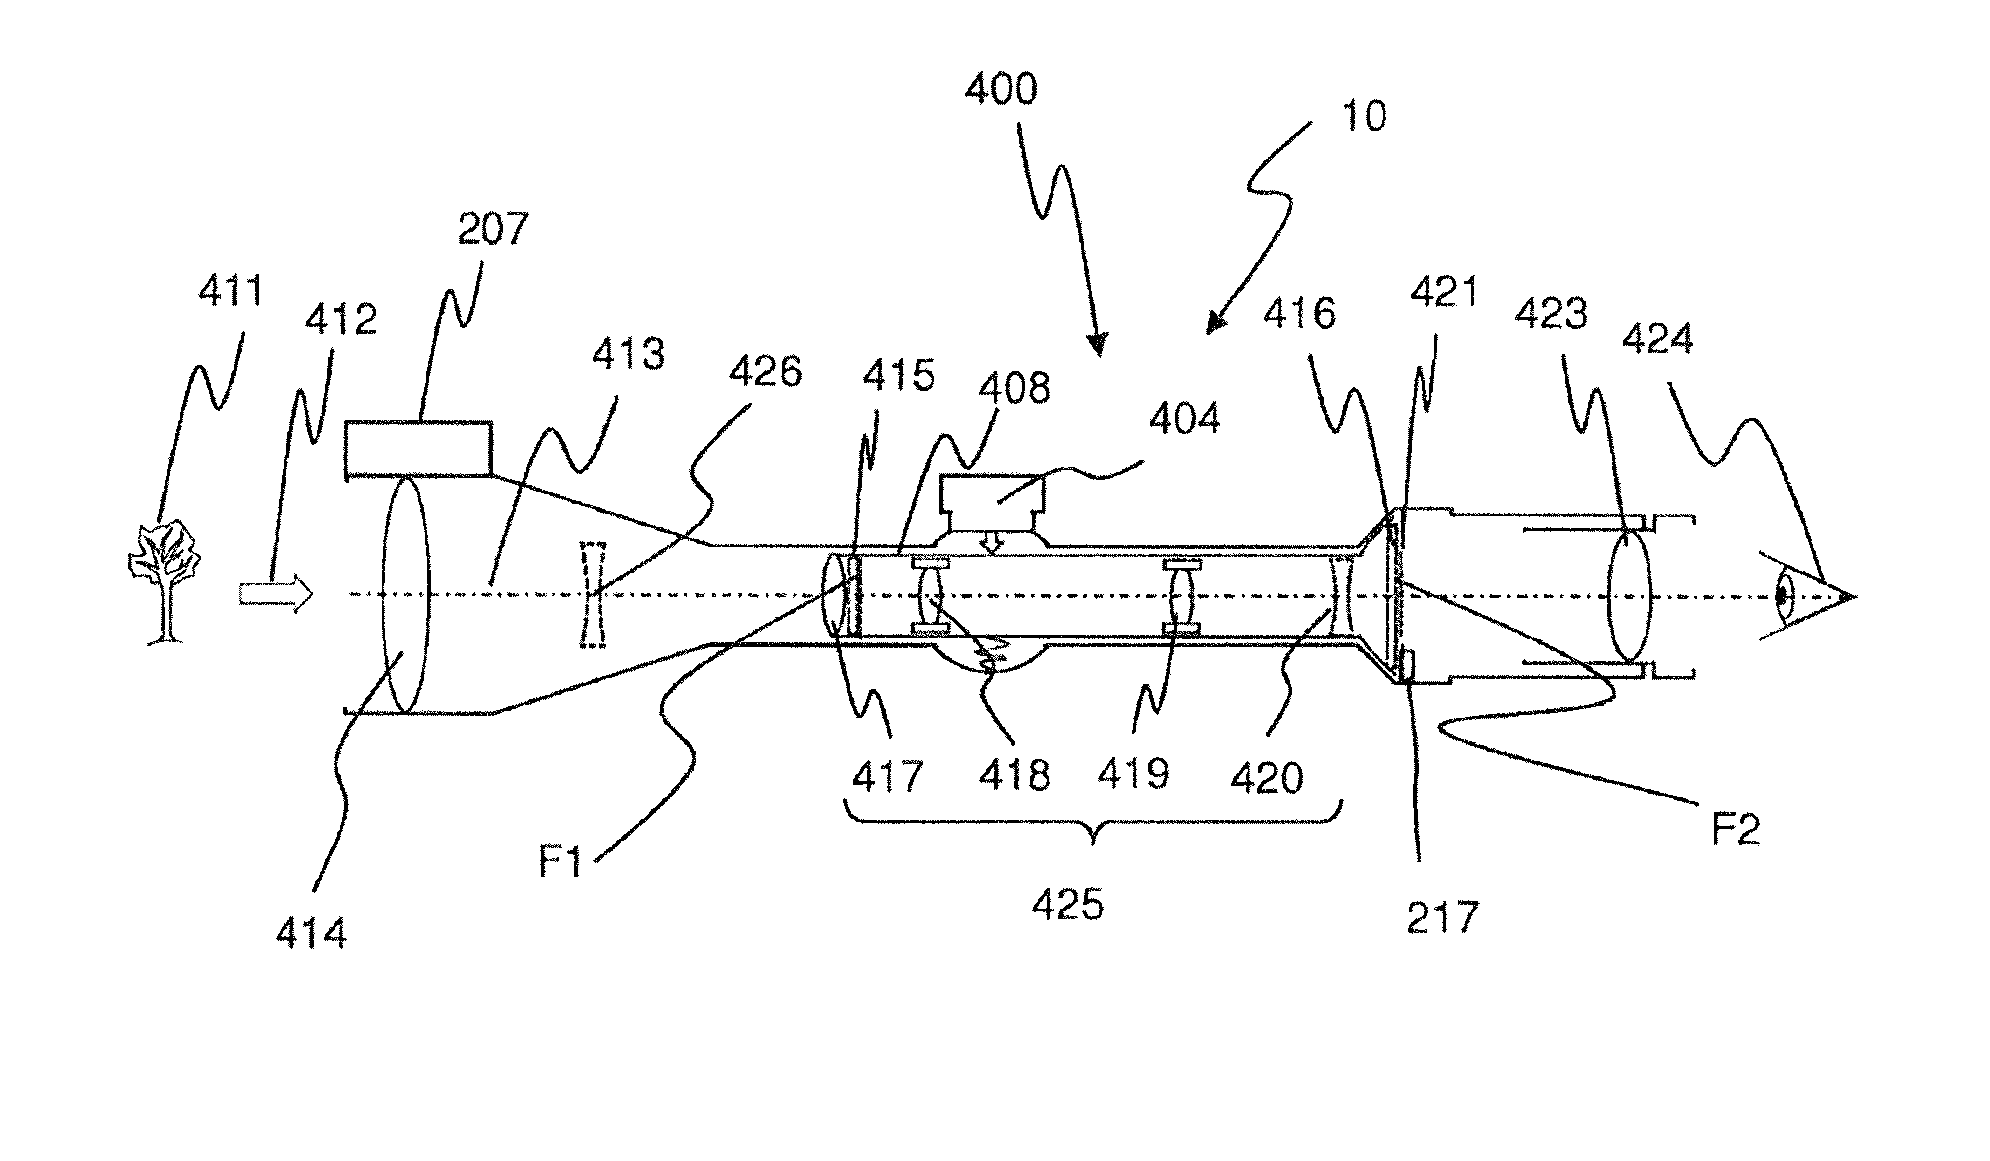 Long-range optical instrument and peripheral device and method for providing communication between the long-range optical instrument and the peripheral device